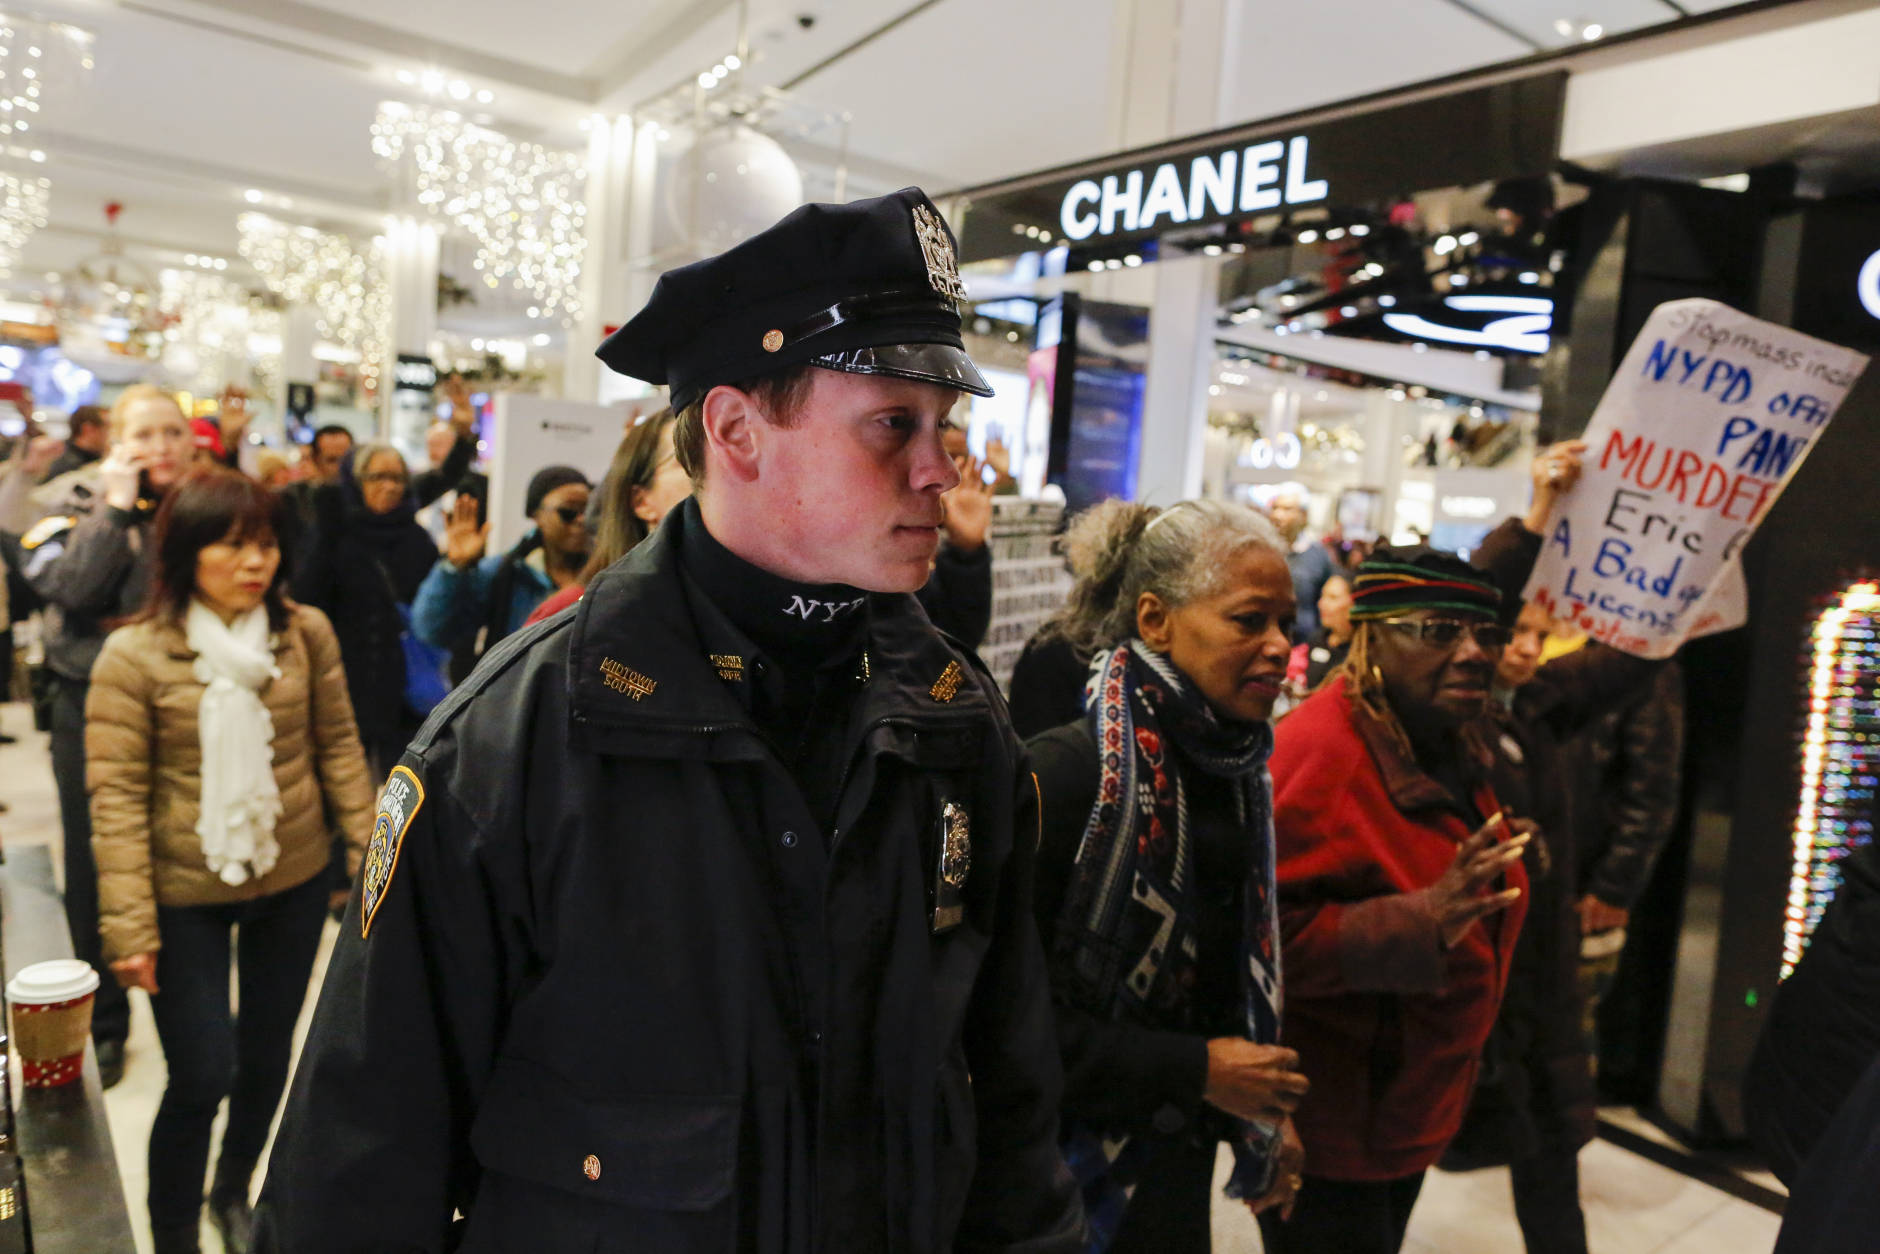 NEW YORK, NY - NOVEMBER 25:  NYPD officer keeps an eye on protesters as they demonstrate against racial injustice and police brutality during Black Friday events at Macy's retail store on November 25, 2016 in New York City.  In cities across the nation, protests are planned to disrupt Black Friday shopping. (Photo by Eduardo Munoz Alvarez/Getty Images)